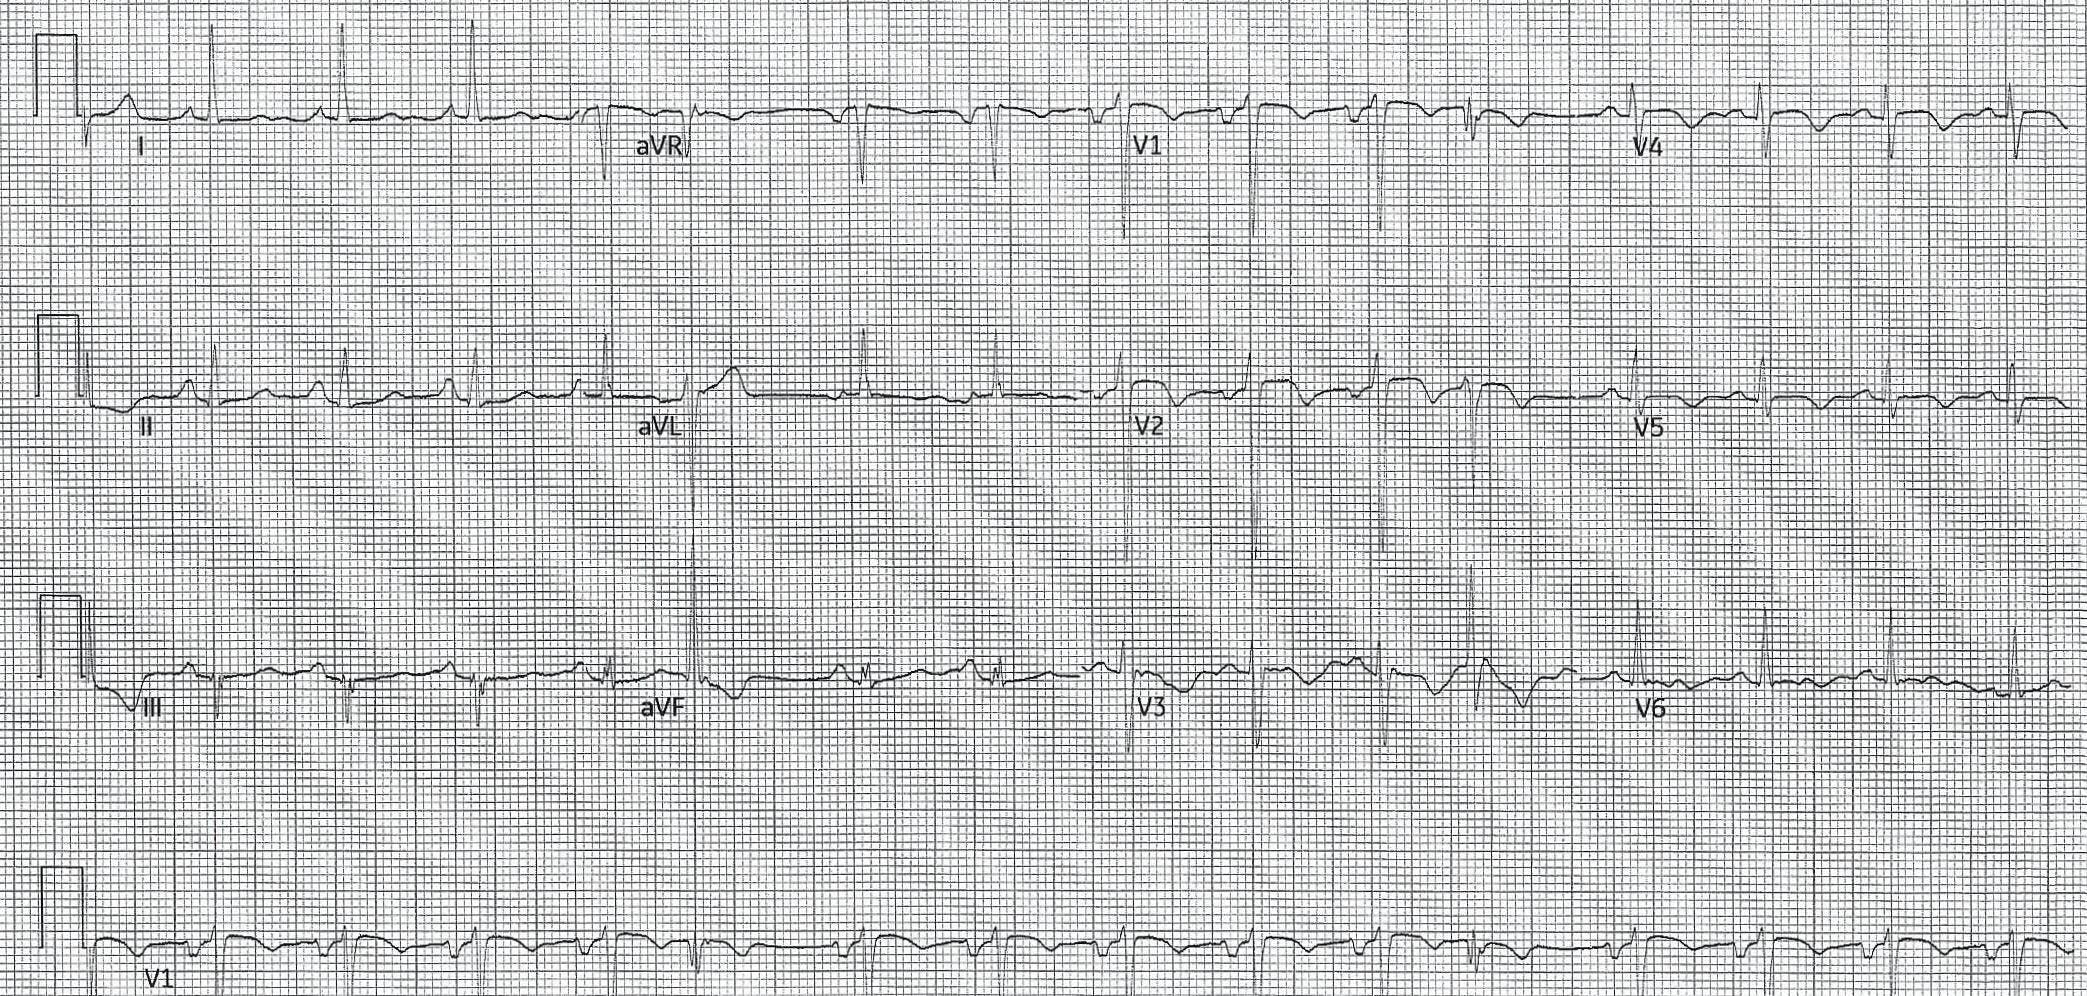 EKG strip from a patient experiencing an acute coronary syndrome.